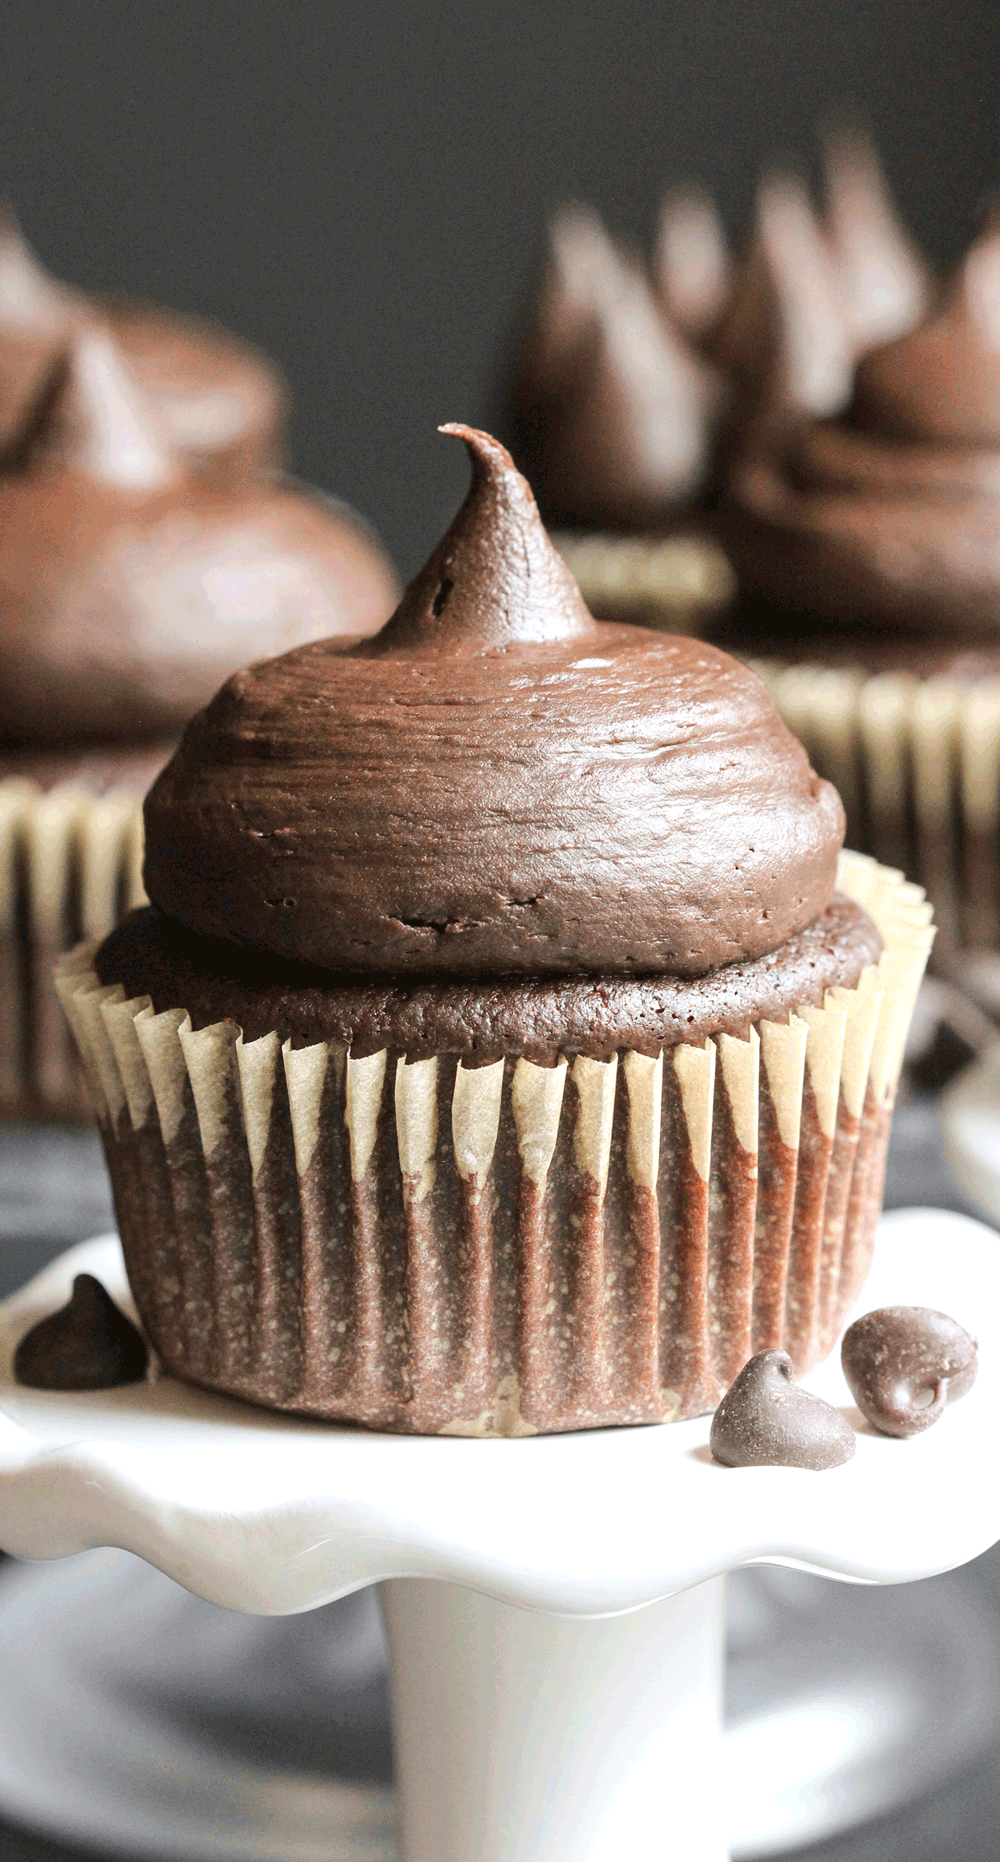 Healthy Gluten-Free Chocolate Cupcakes! Craving chocolate but don't want all the calories, fat, and sugar? Make these Gluten-Free Chocolate Cupcakes! They’re whole grain, gluten free, have no sugar added, and are made without butter or excess oil. Healthy Dessert Recipes with sugar free, low calorie, low fat, high protein, gluten free, dairy free, vegan, and raw options at the Desserts With Benefits Blog (www.DessertsWithBenefits.com)